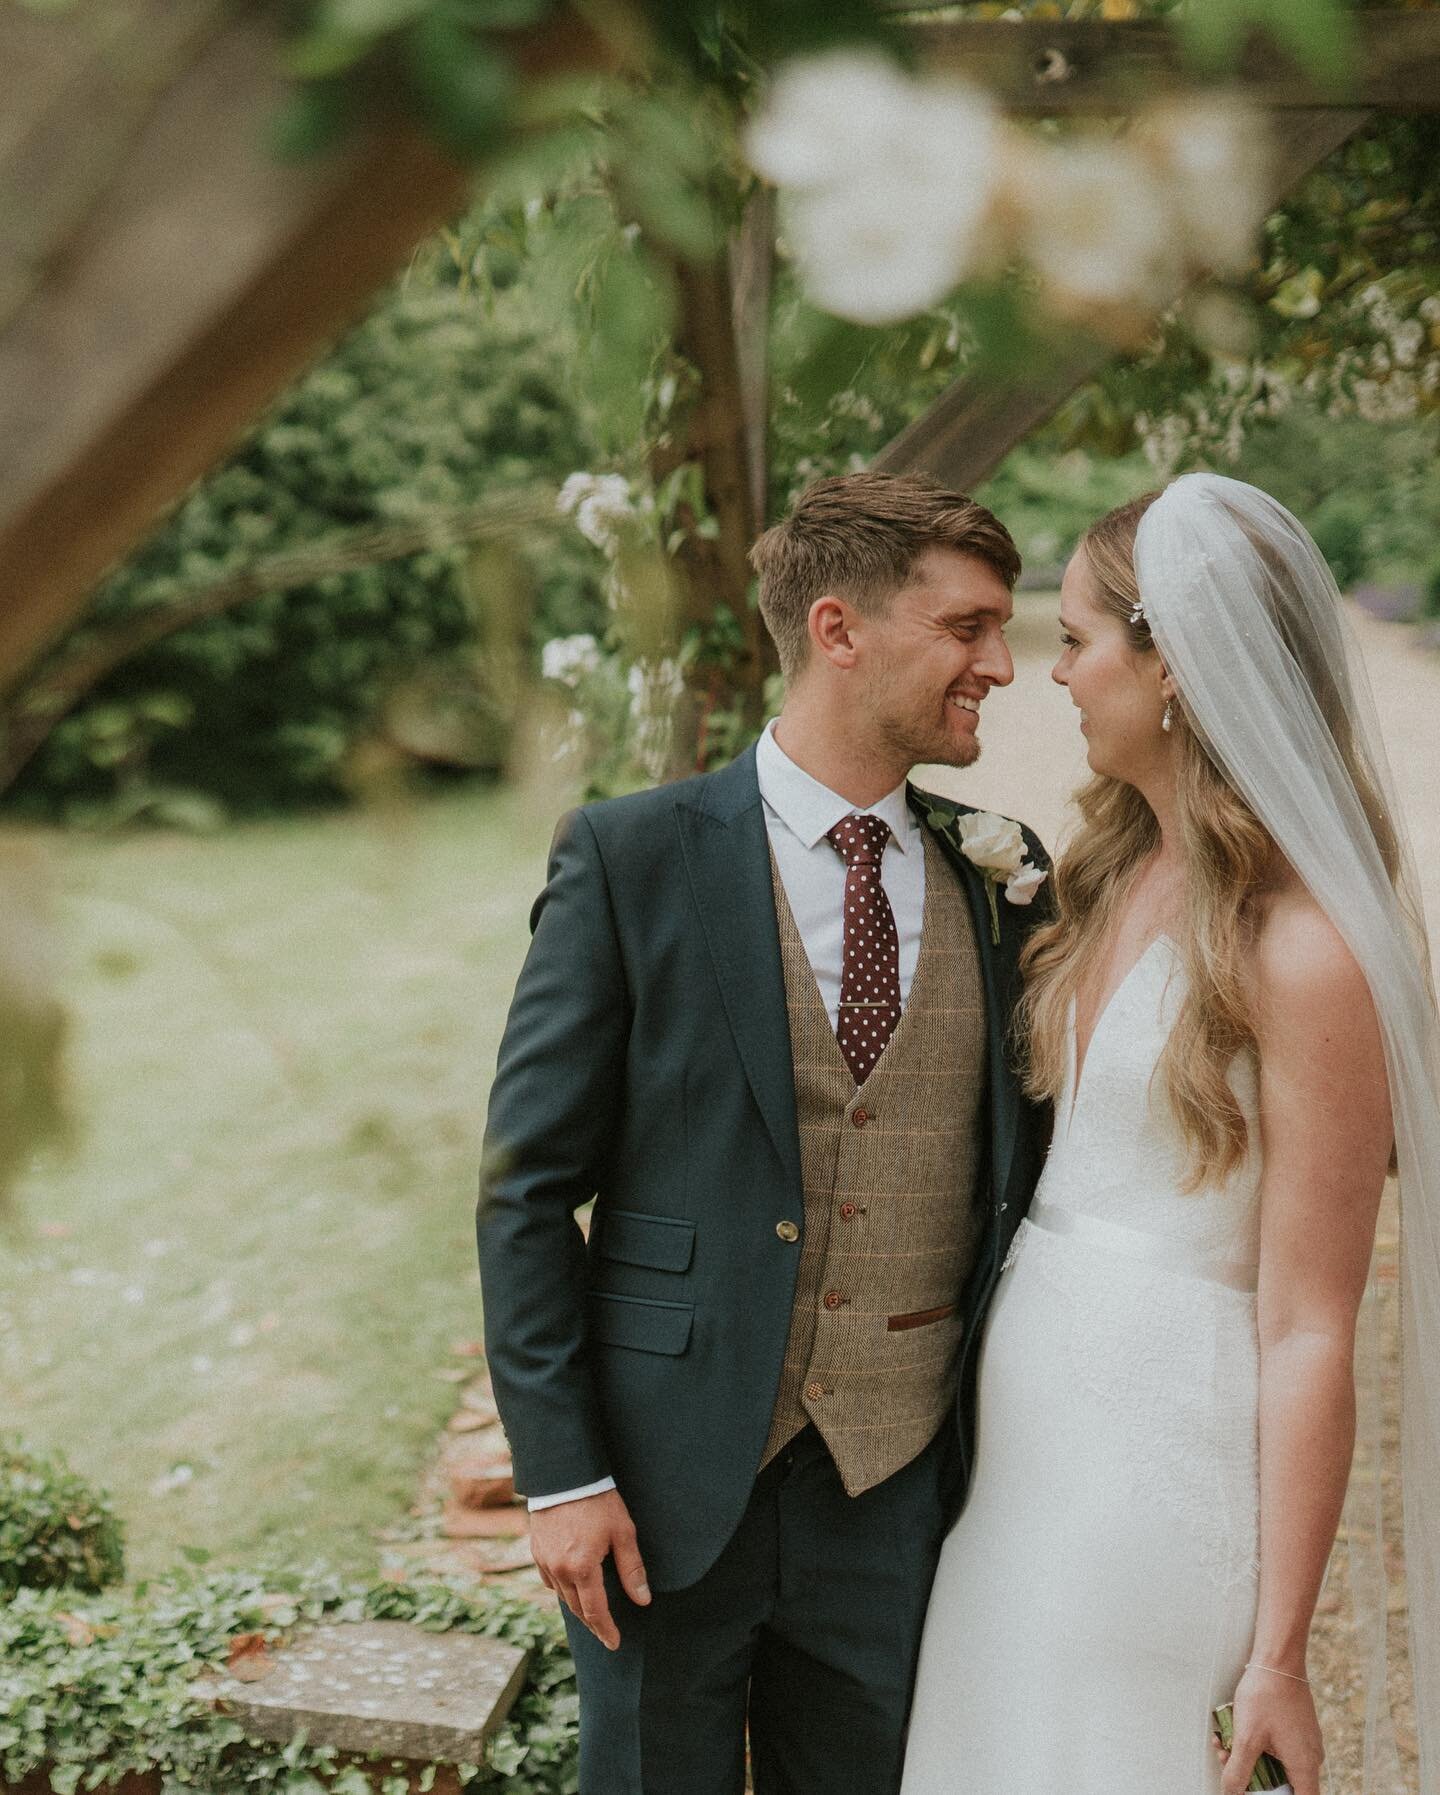 A couple of our favourite shots from Lucy and Sam&rsquo;s special day at Deans Court a few weeks ago ✨

Their wedding was filled with beautiful details, like fresh sprigs of eucalyptus, vintage cars and twinkling candles, all making the day feel comp